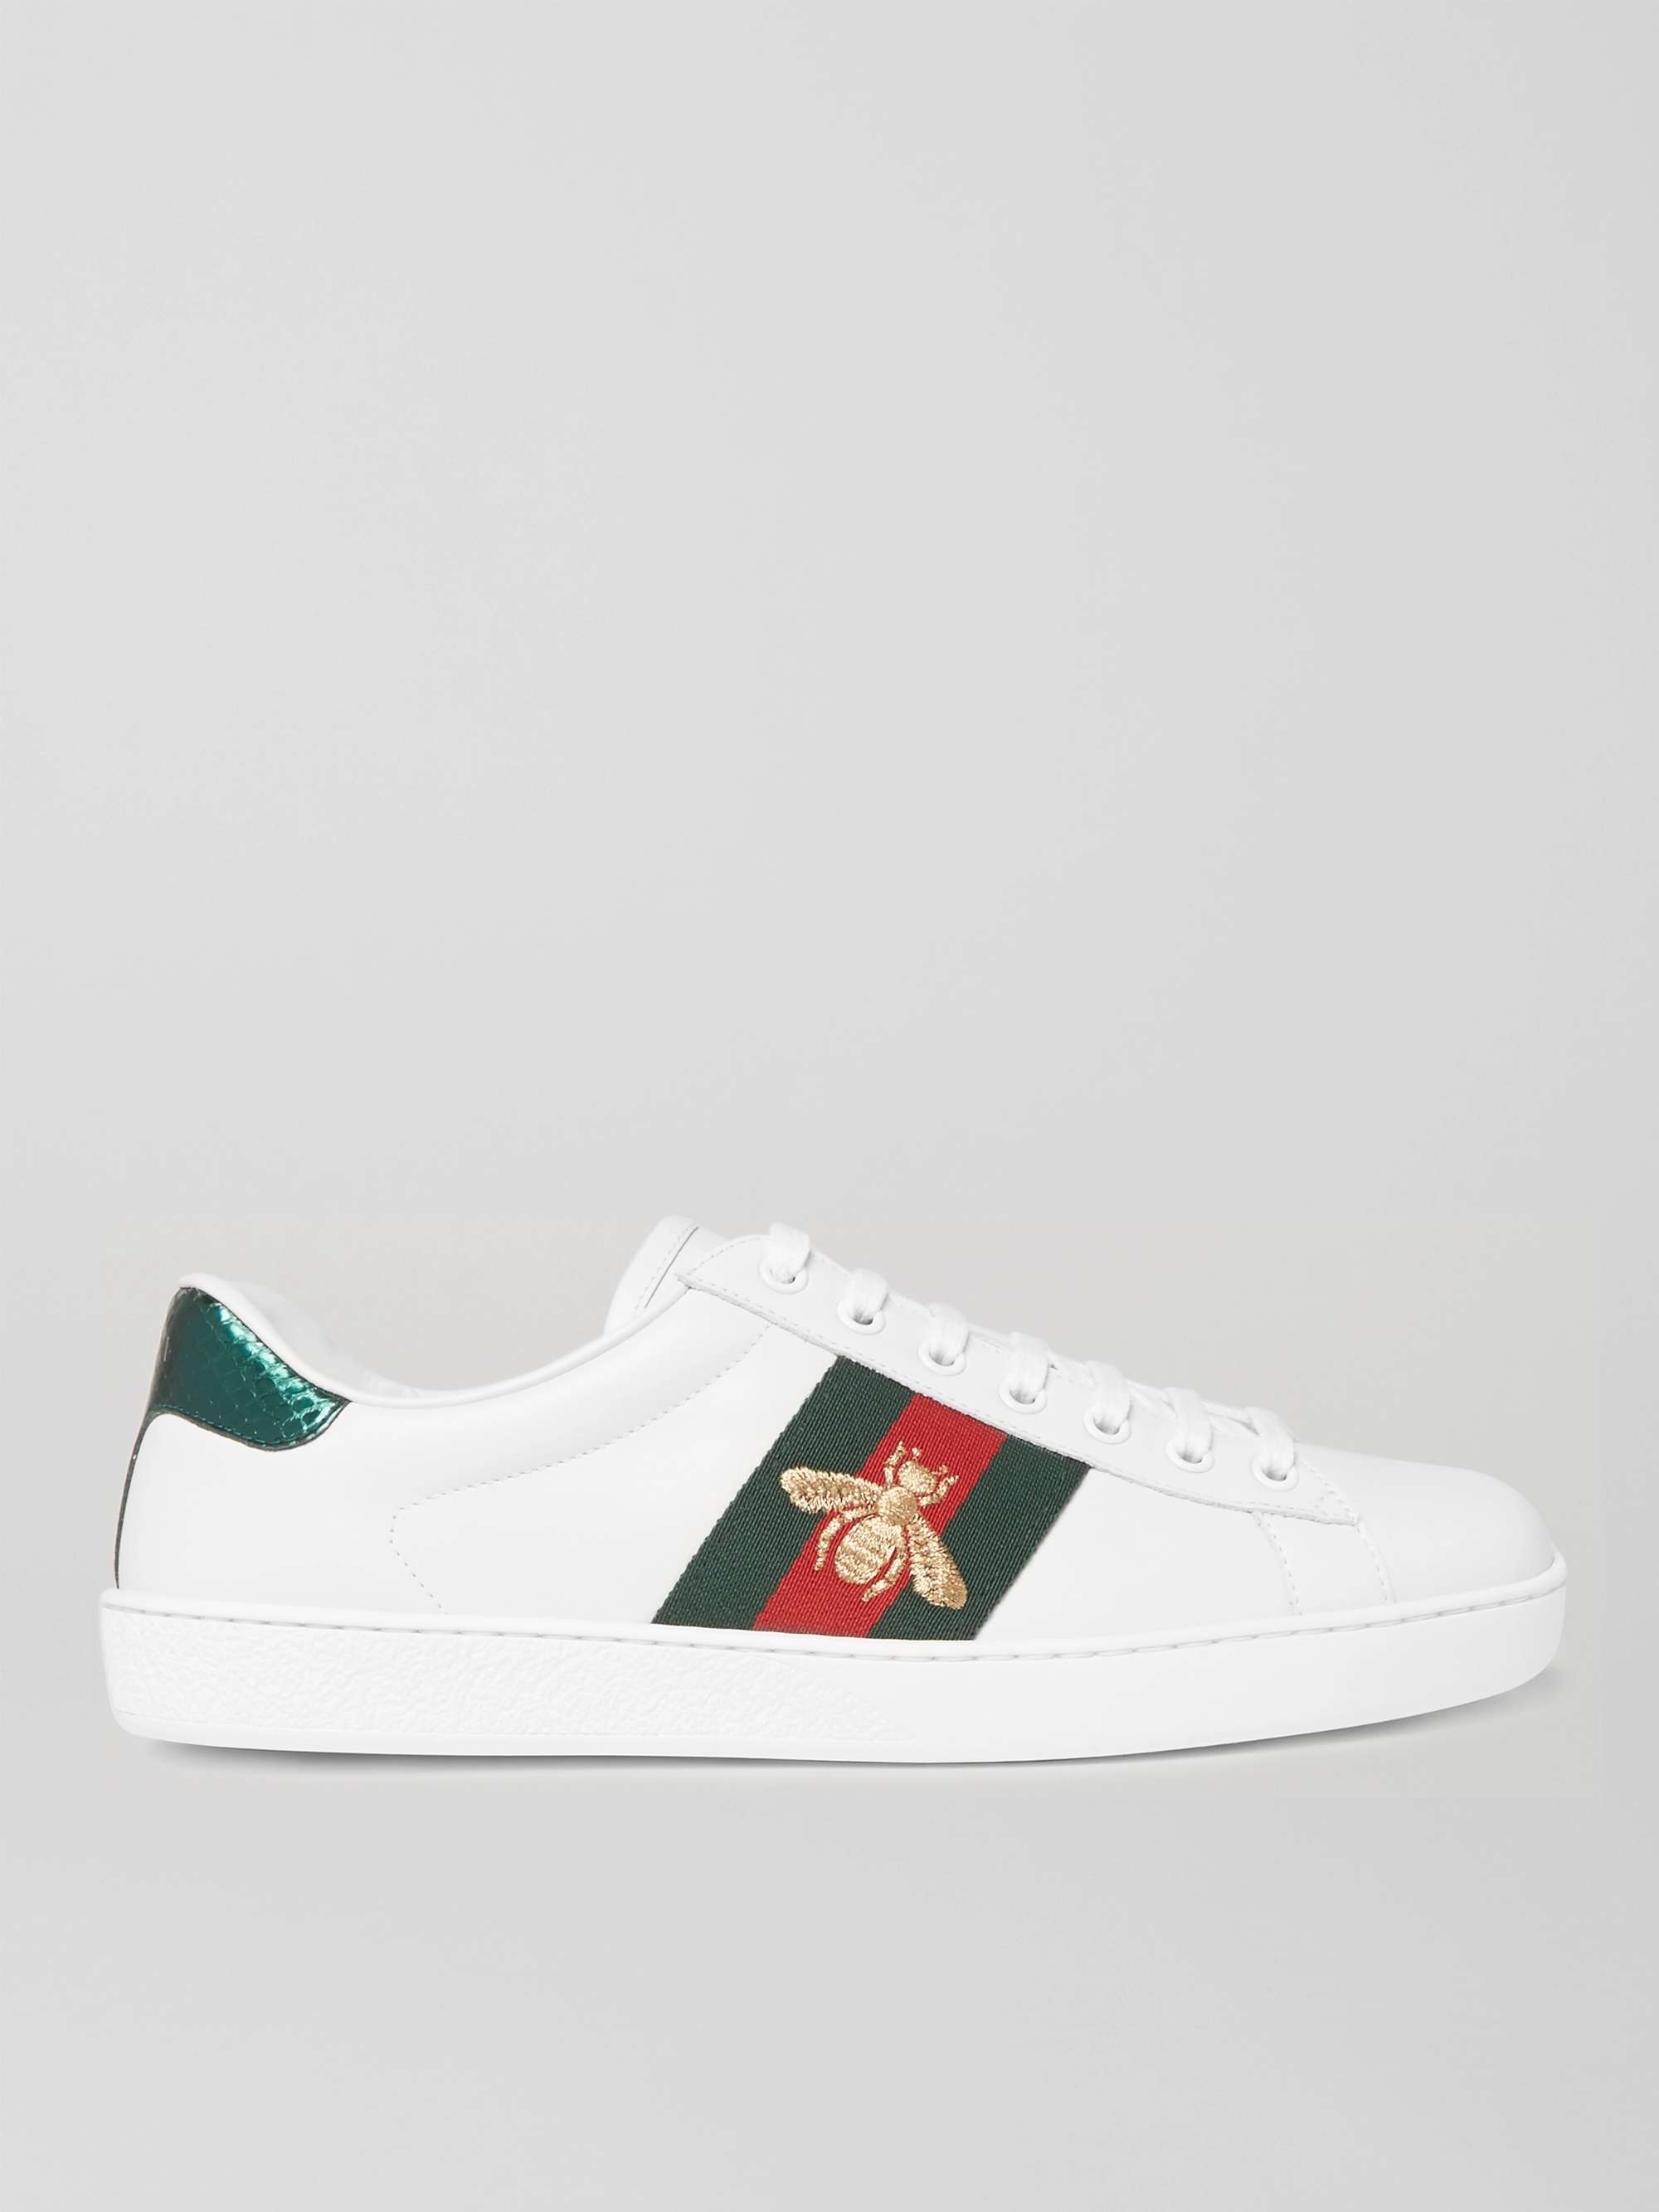 Gucci Men's Ace Bee Embroidered Leather Sneakers